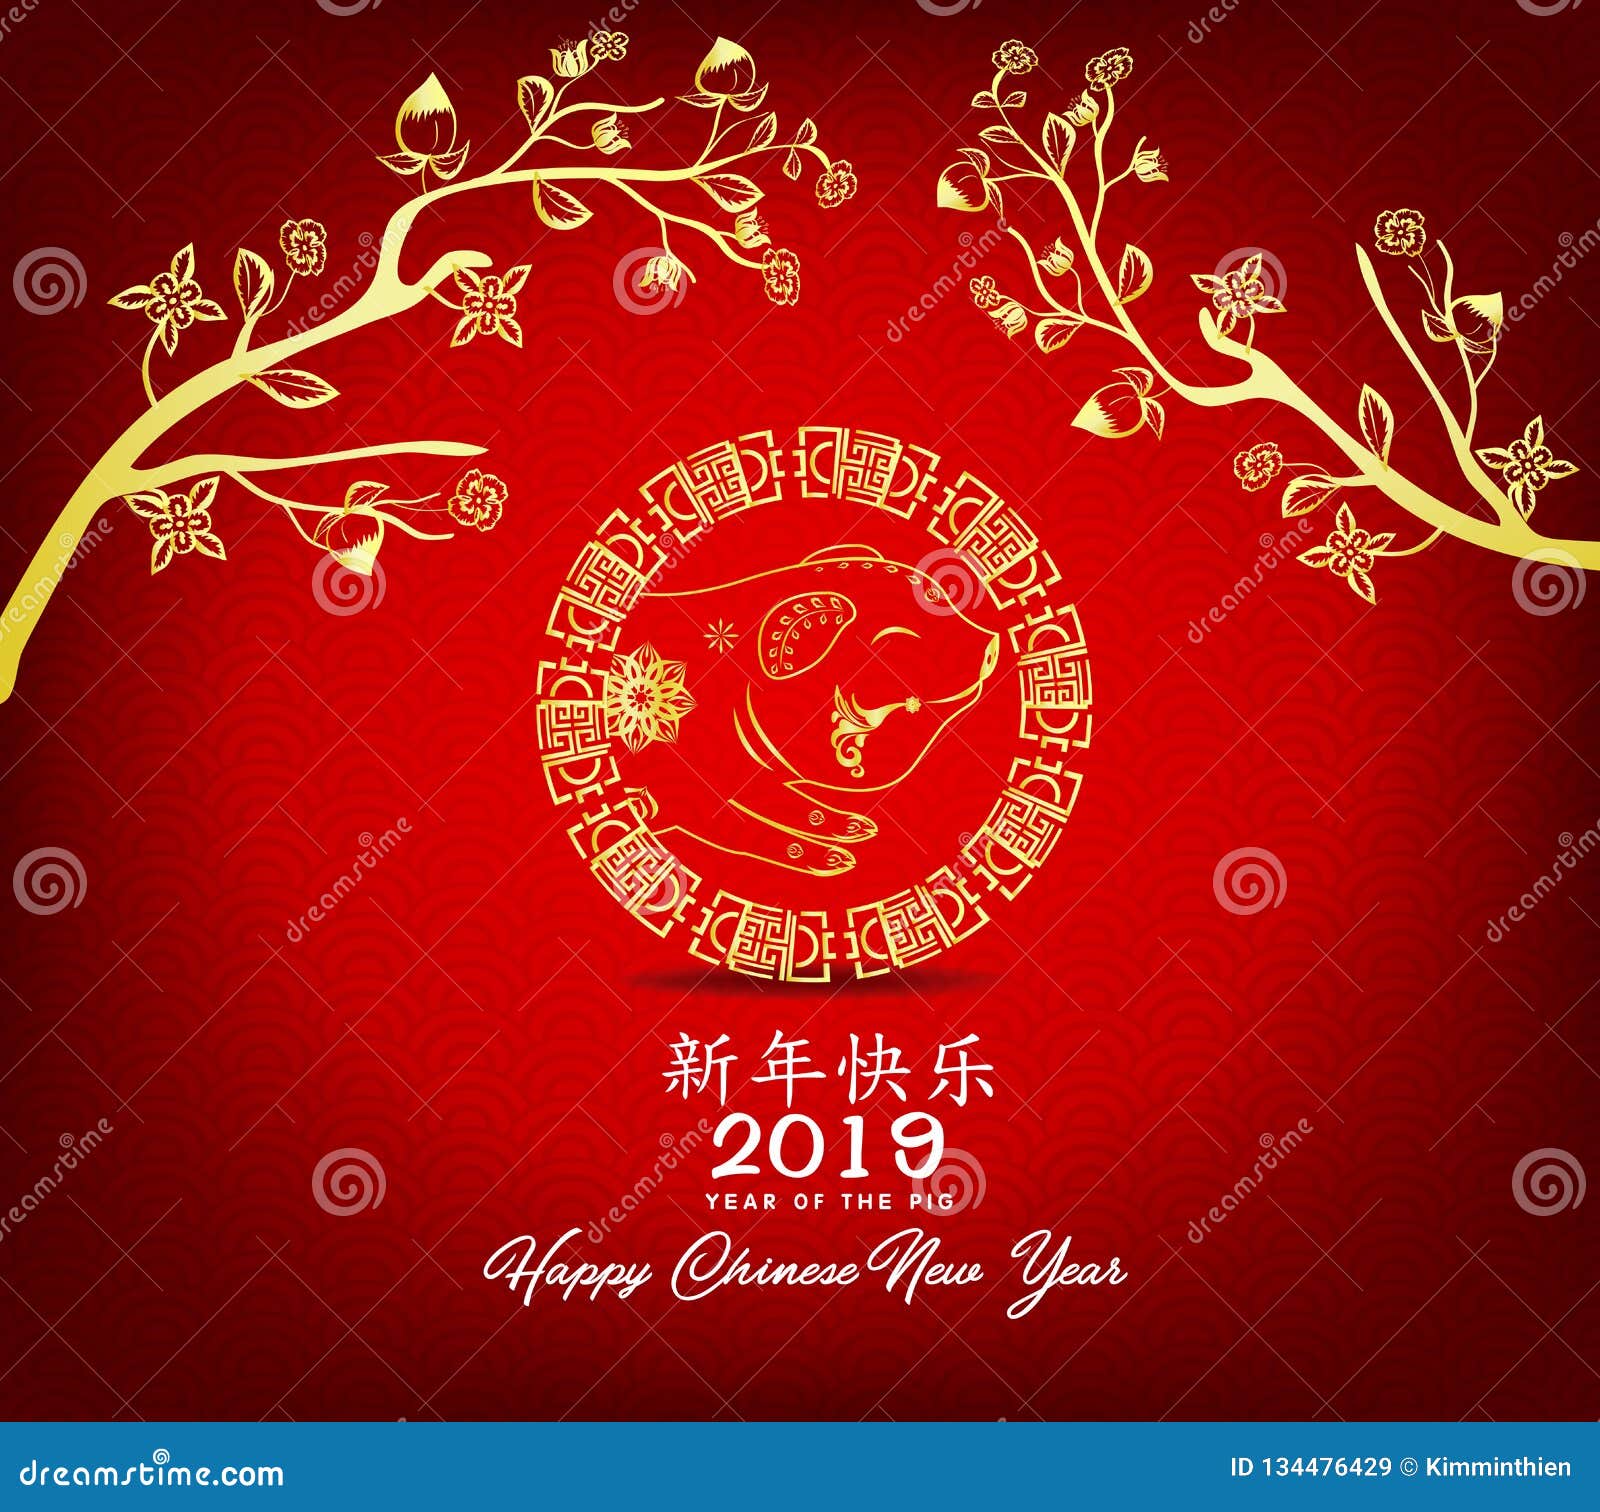 Happy Lunar New Year In Chinese